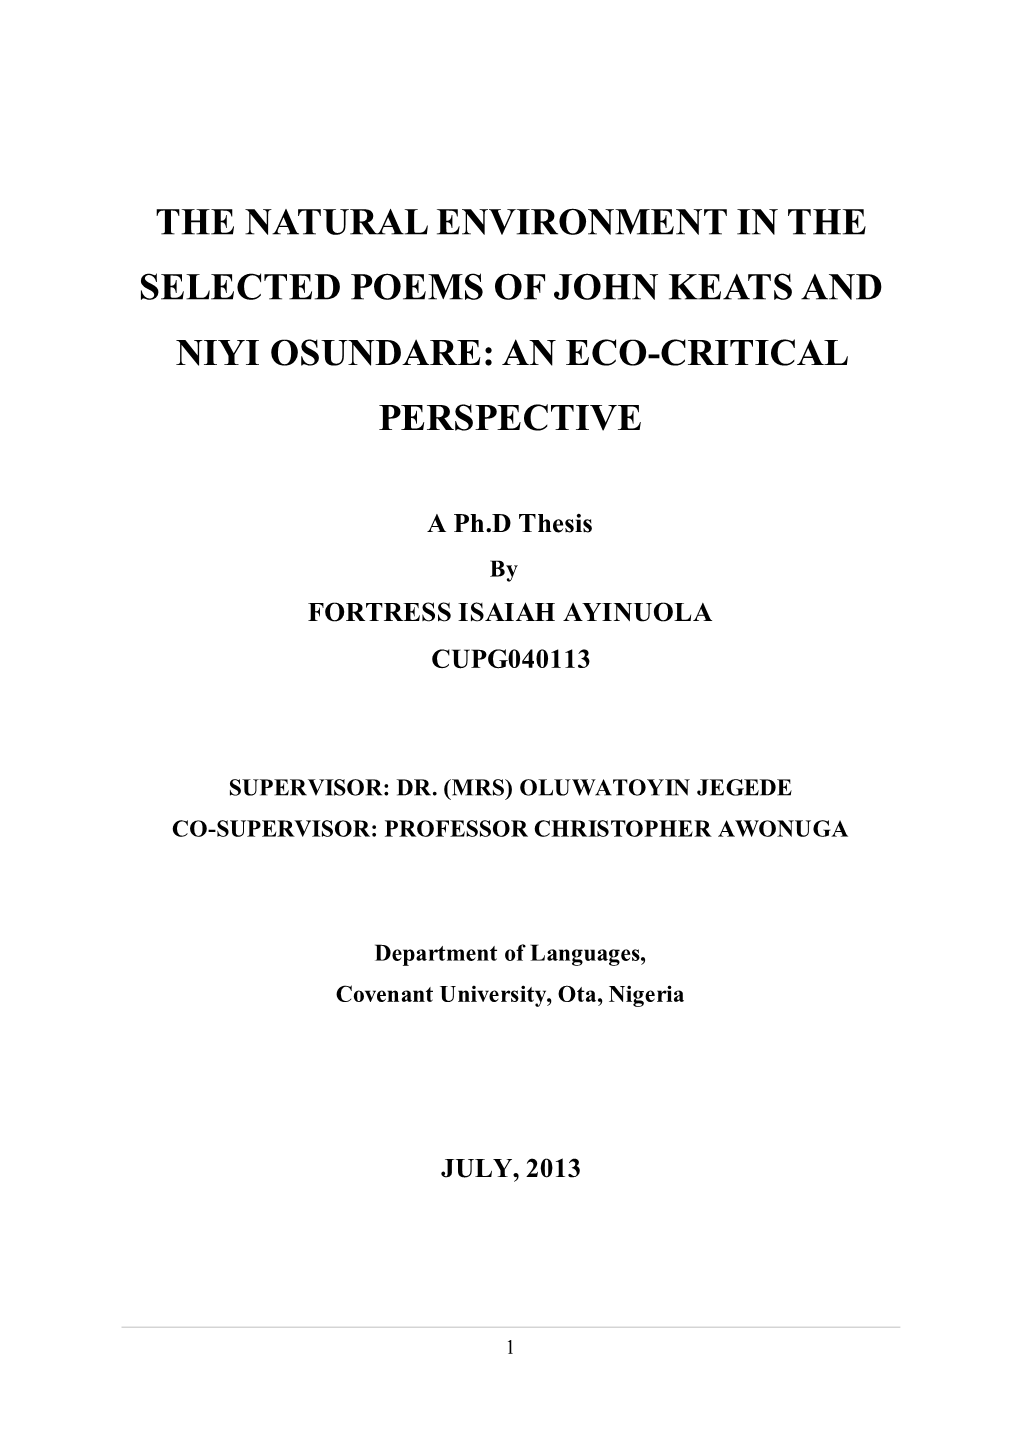 The Natural Environment in the Selected Poems of John Keats and Niyi Osundare: an Eco-Critical Perspective